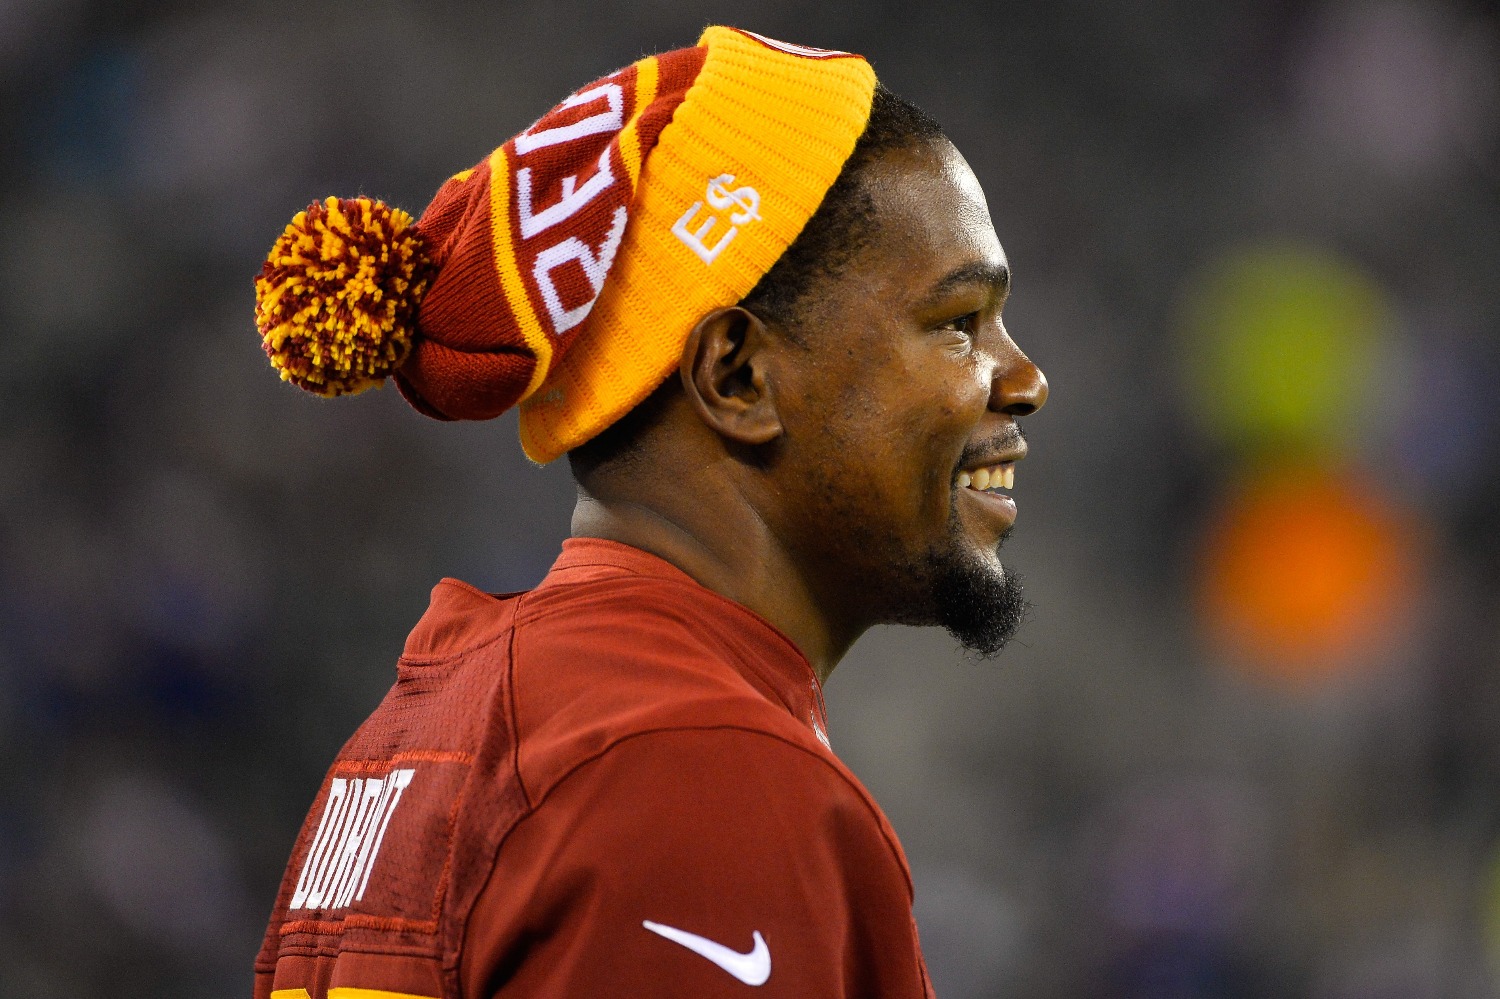 Kevin Durant is the savior the Washington Redskins desperately need.